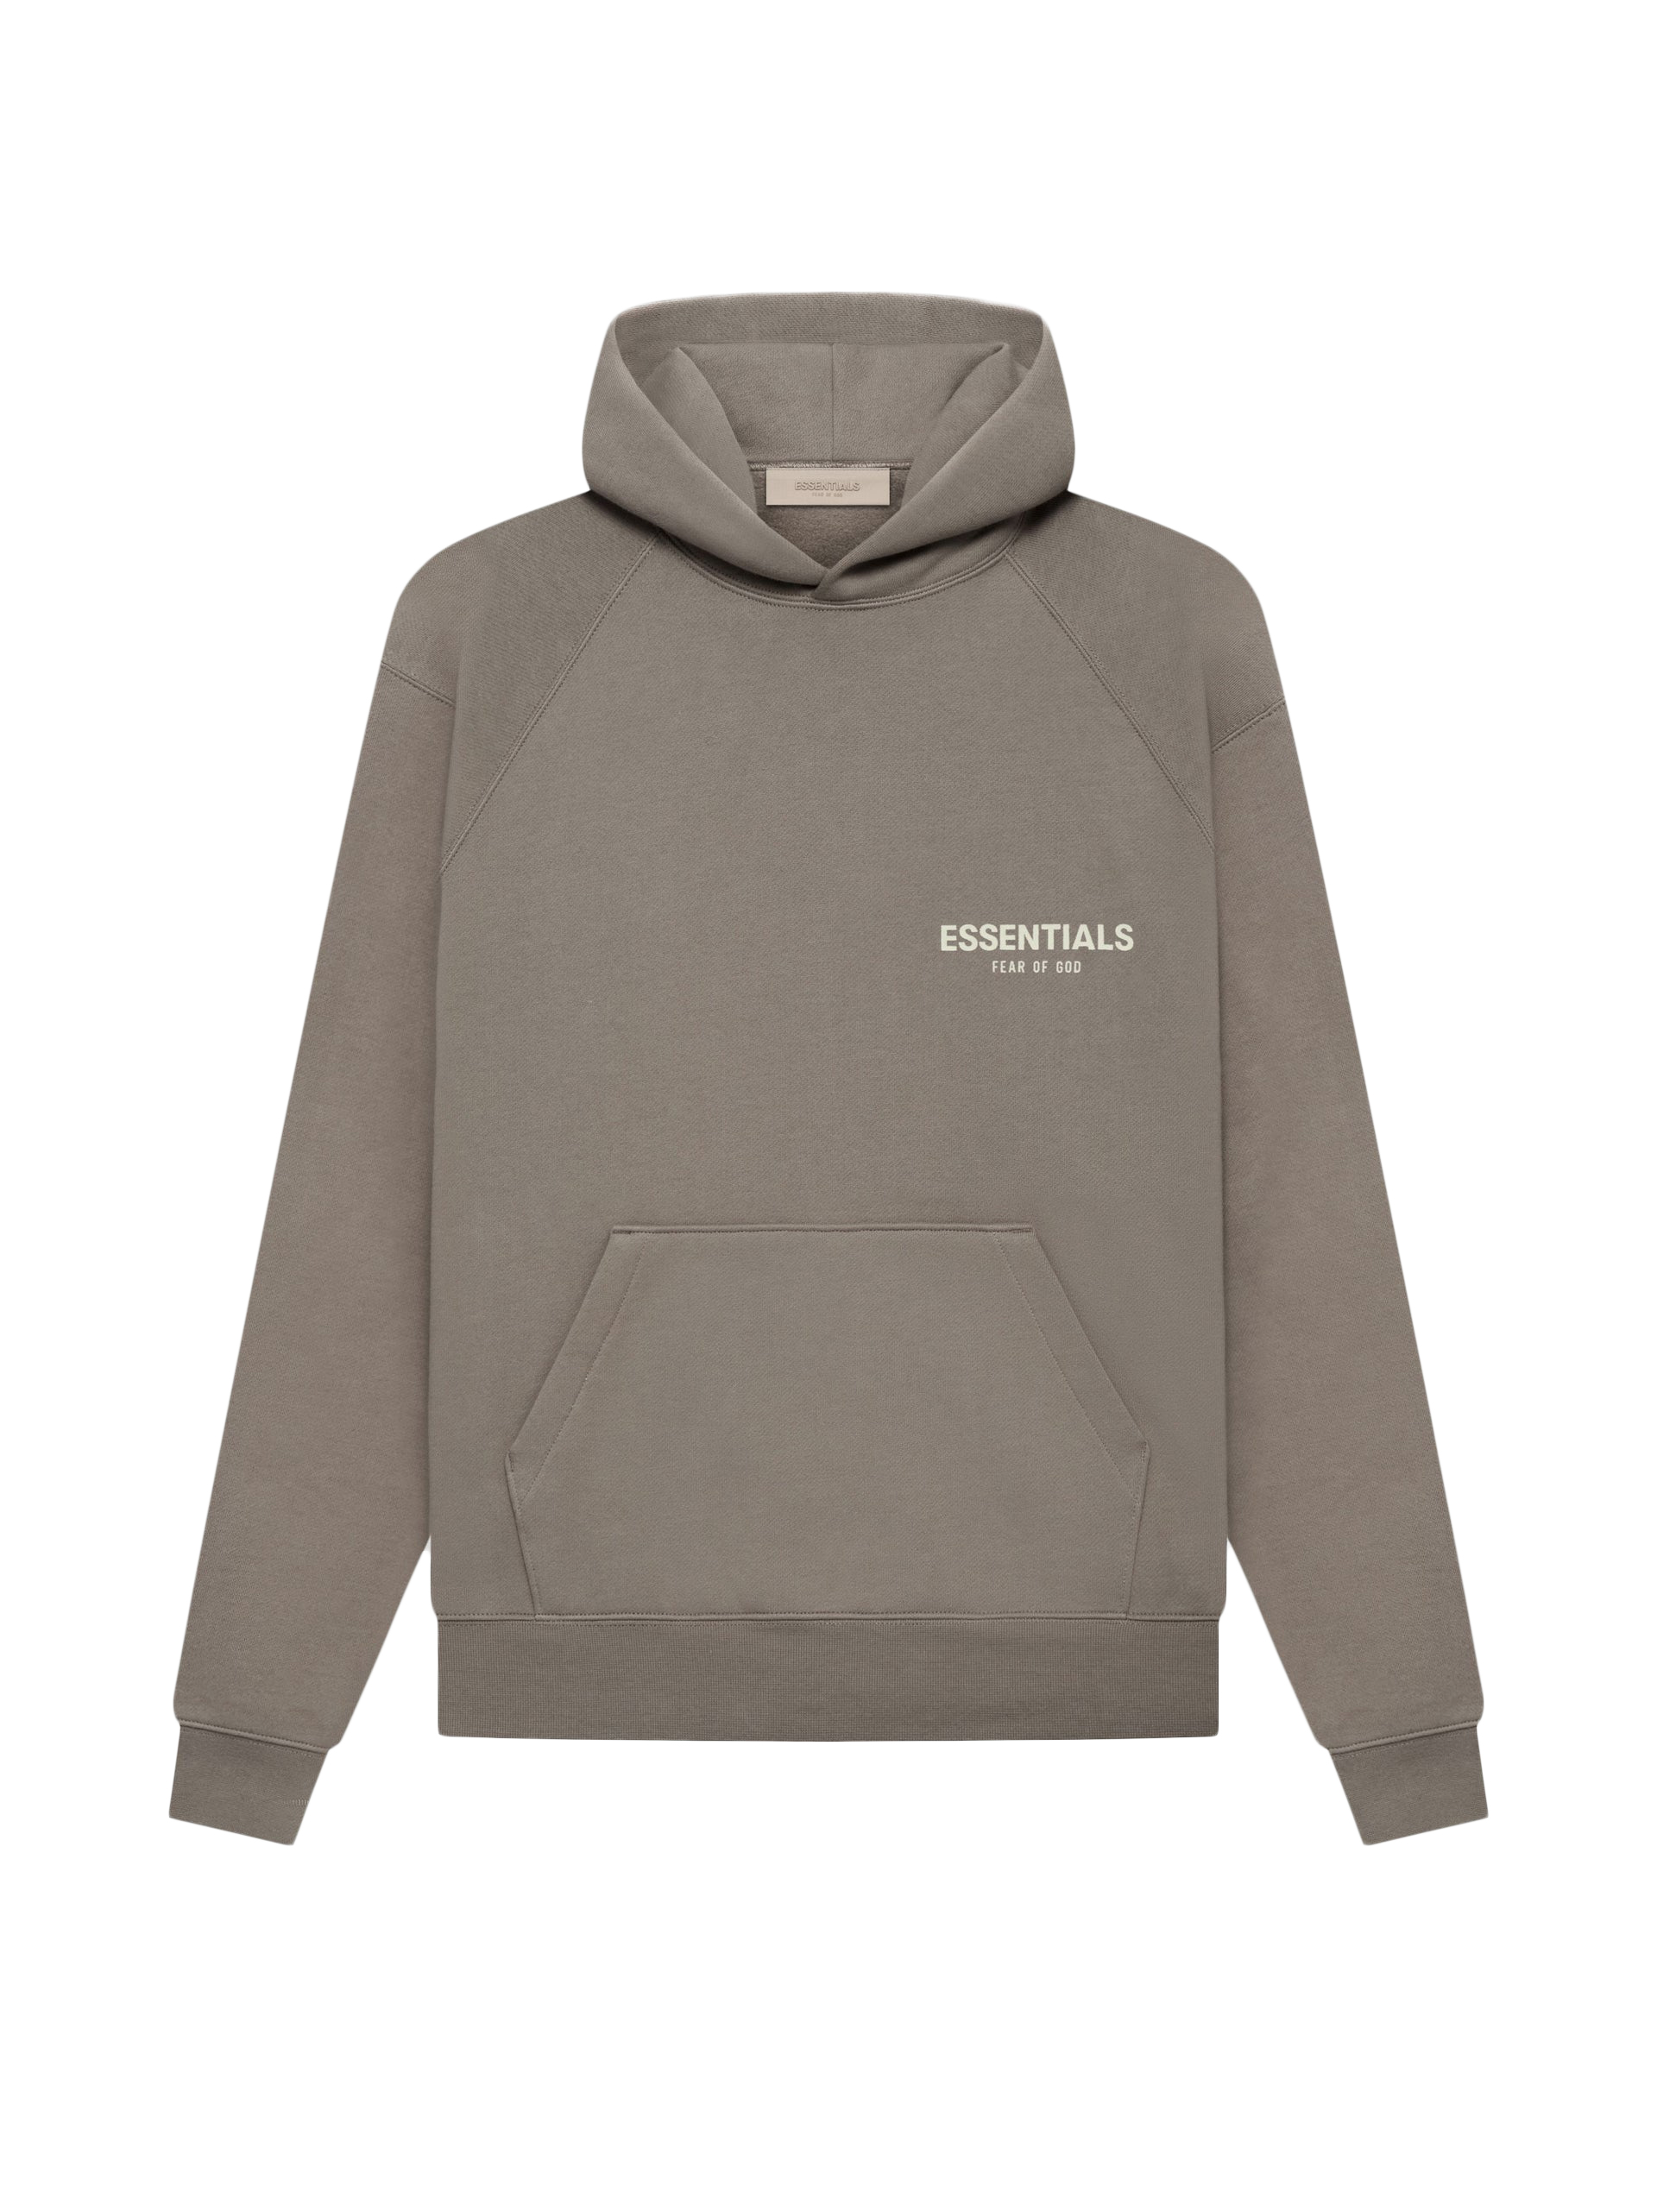 Fear of God Essentials Hoodie Desert Taupe Men's - SS22 - US